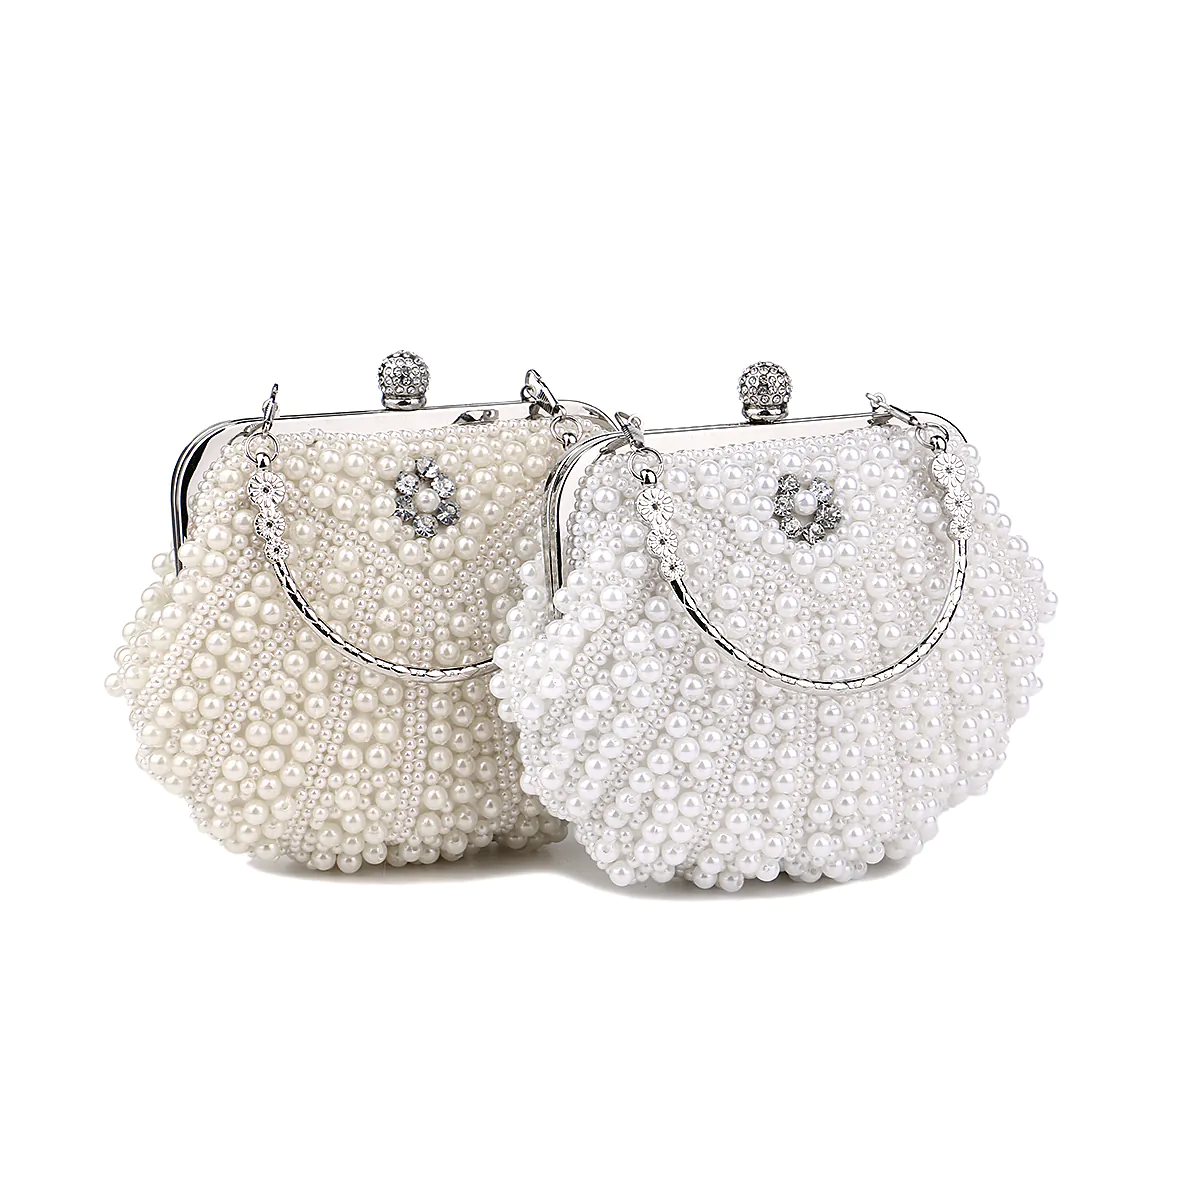 Pearl Crossbody Bag Handbag for Party Date Formal Occasion02